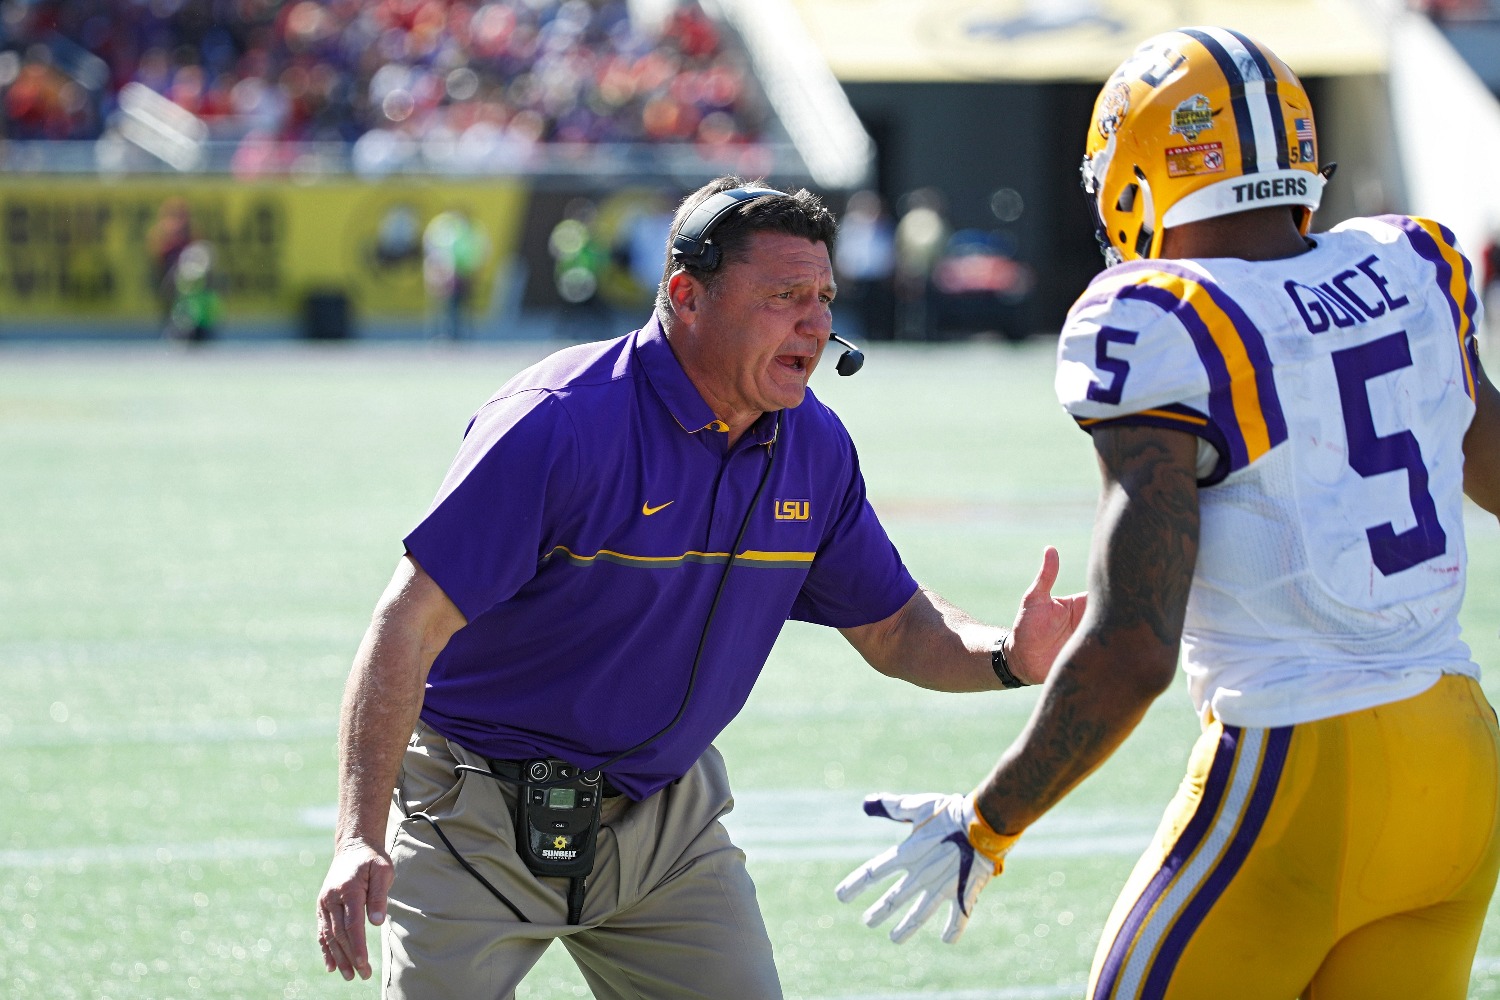 LSU head coach Ed Orgeron delivered a powerful denial that he had knowledge of the rape allegations against Derrius Guice, who starred for the Tigers before getting drafted by the Washington Football Team.